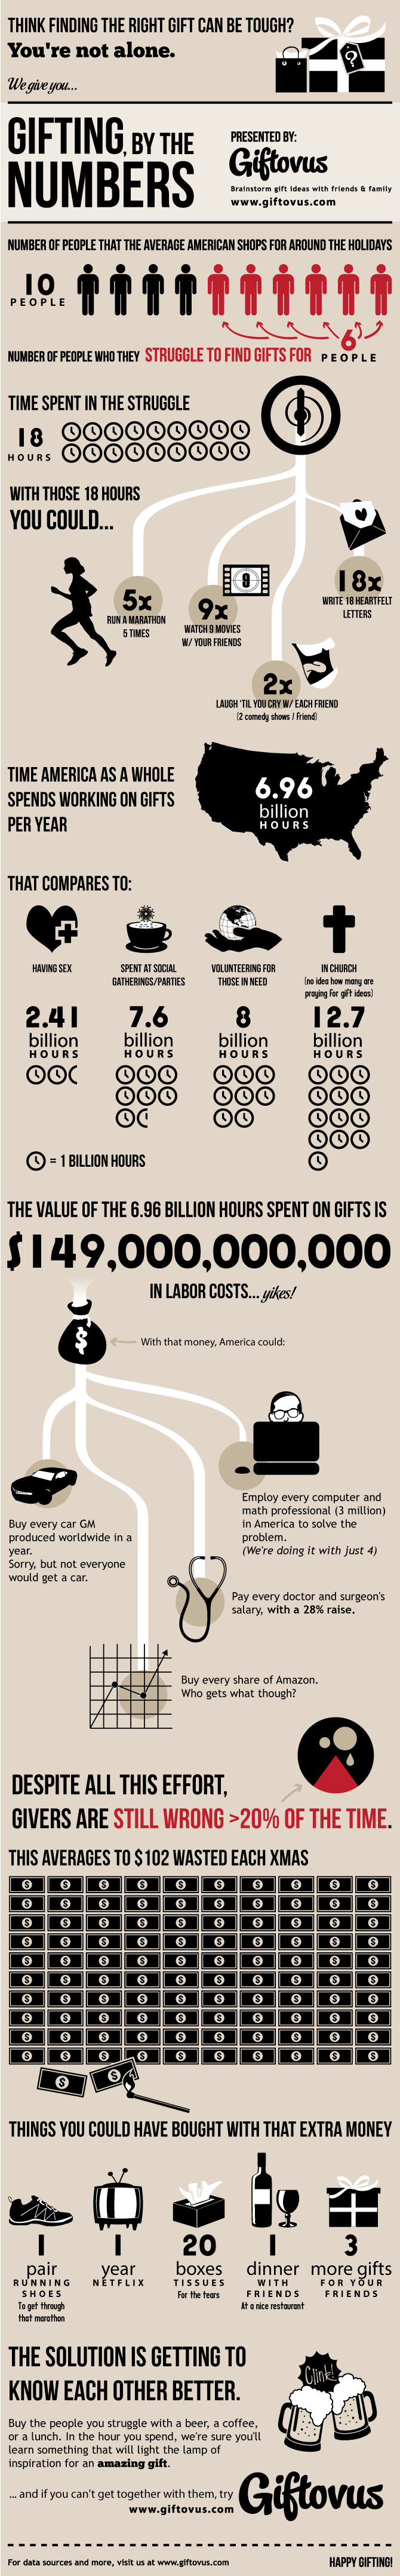 Gifting by the Numbers - Image